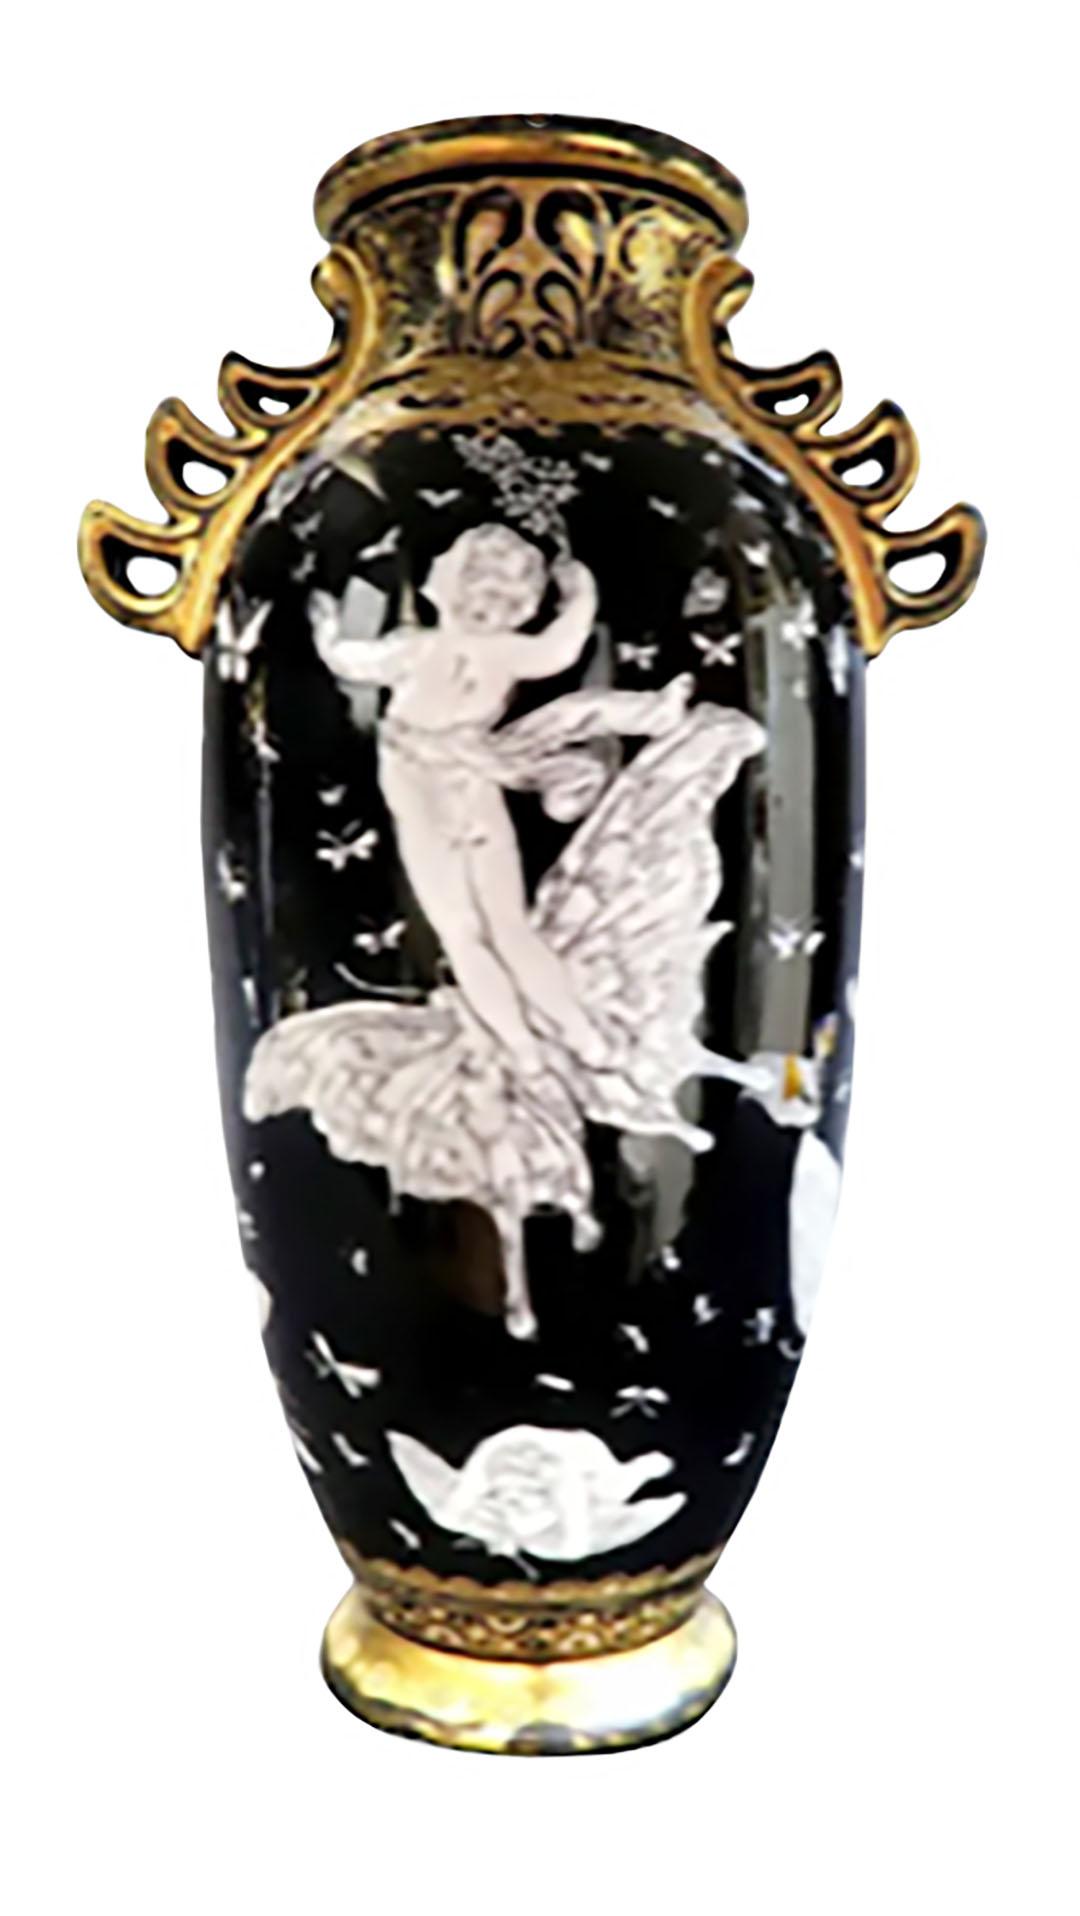 Pair of Minton pate sur pate style vases with white relief butterflies black white, and gold porcelain, circa 1900, England.